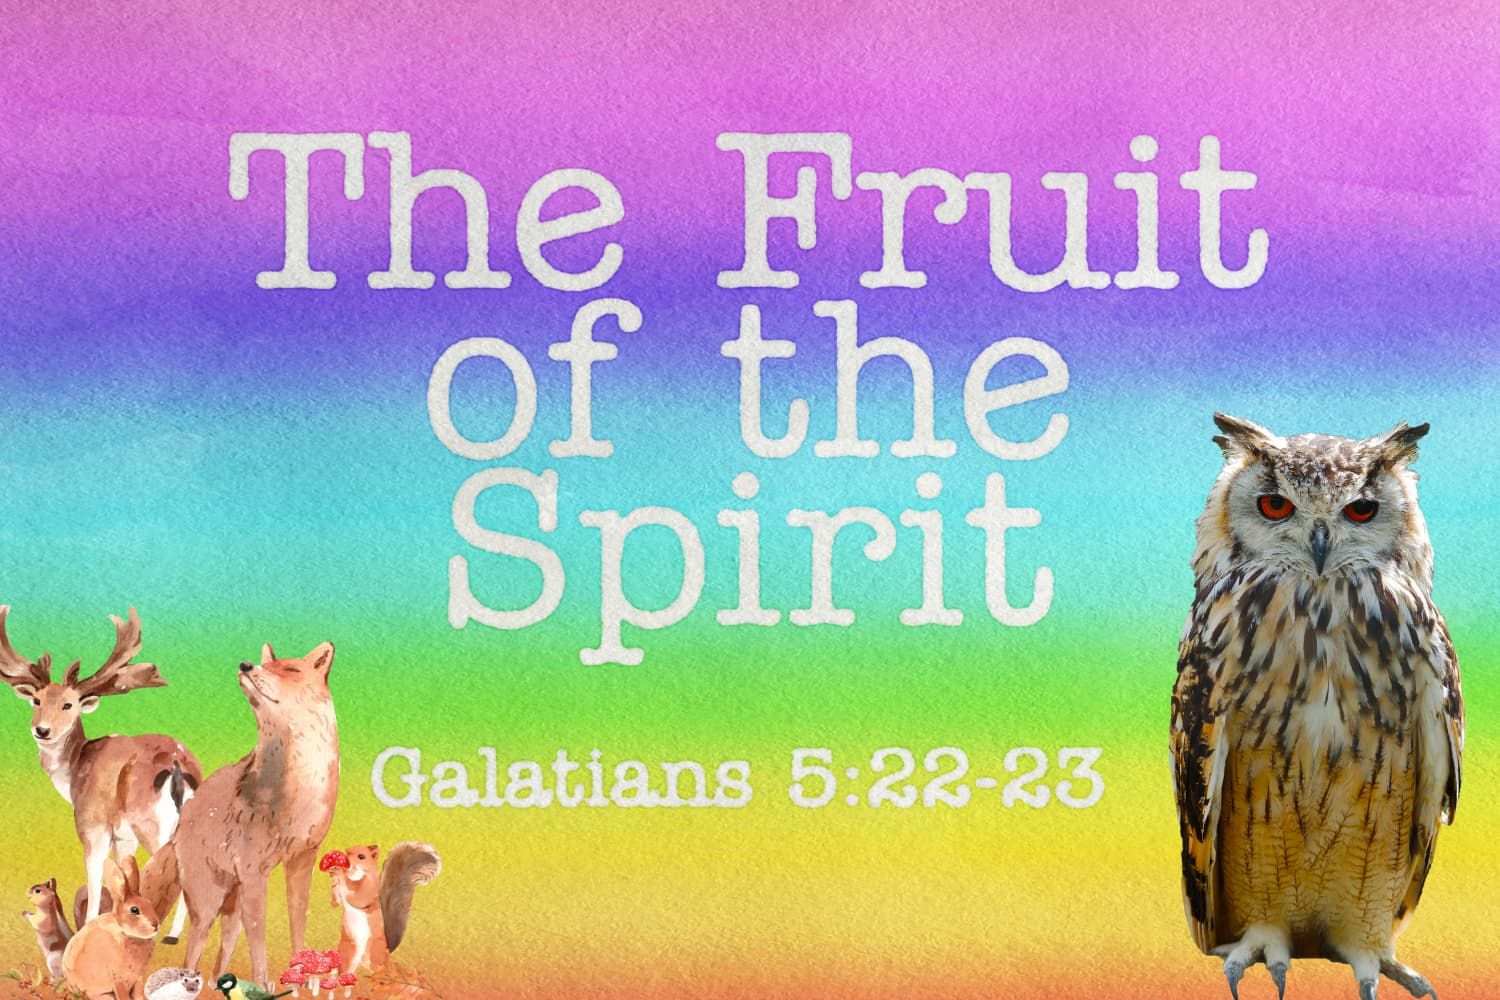 Parable%20-%20Wise%20owl%20and%20fruit%20of%20the%20spirit-d9417540 Paul (apostle)